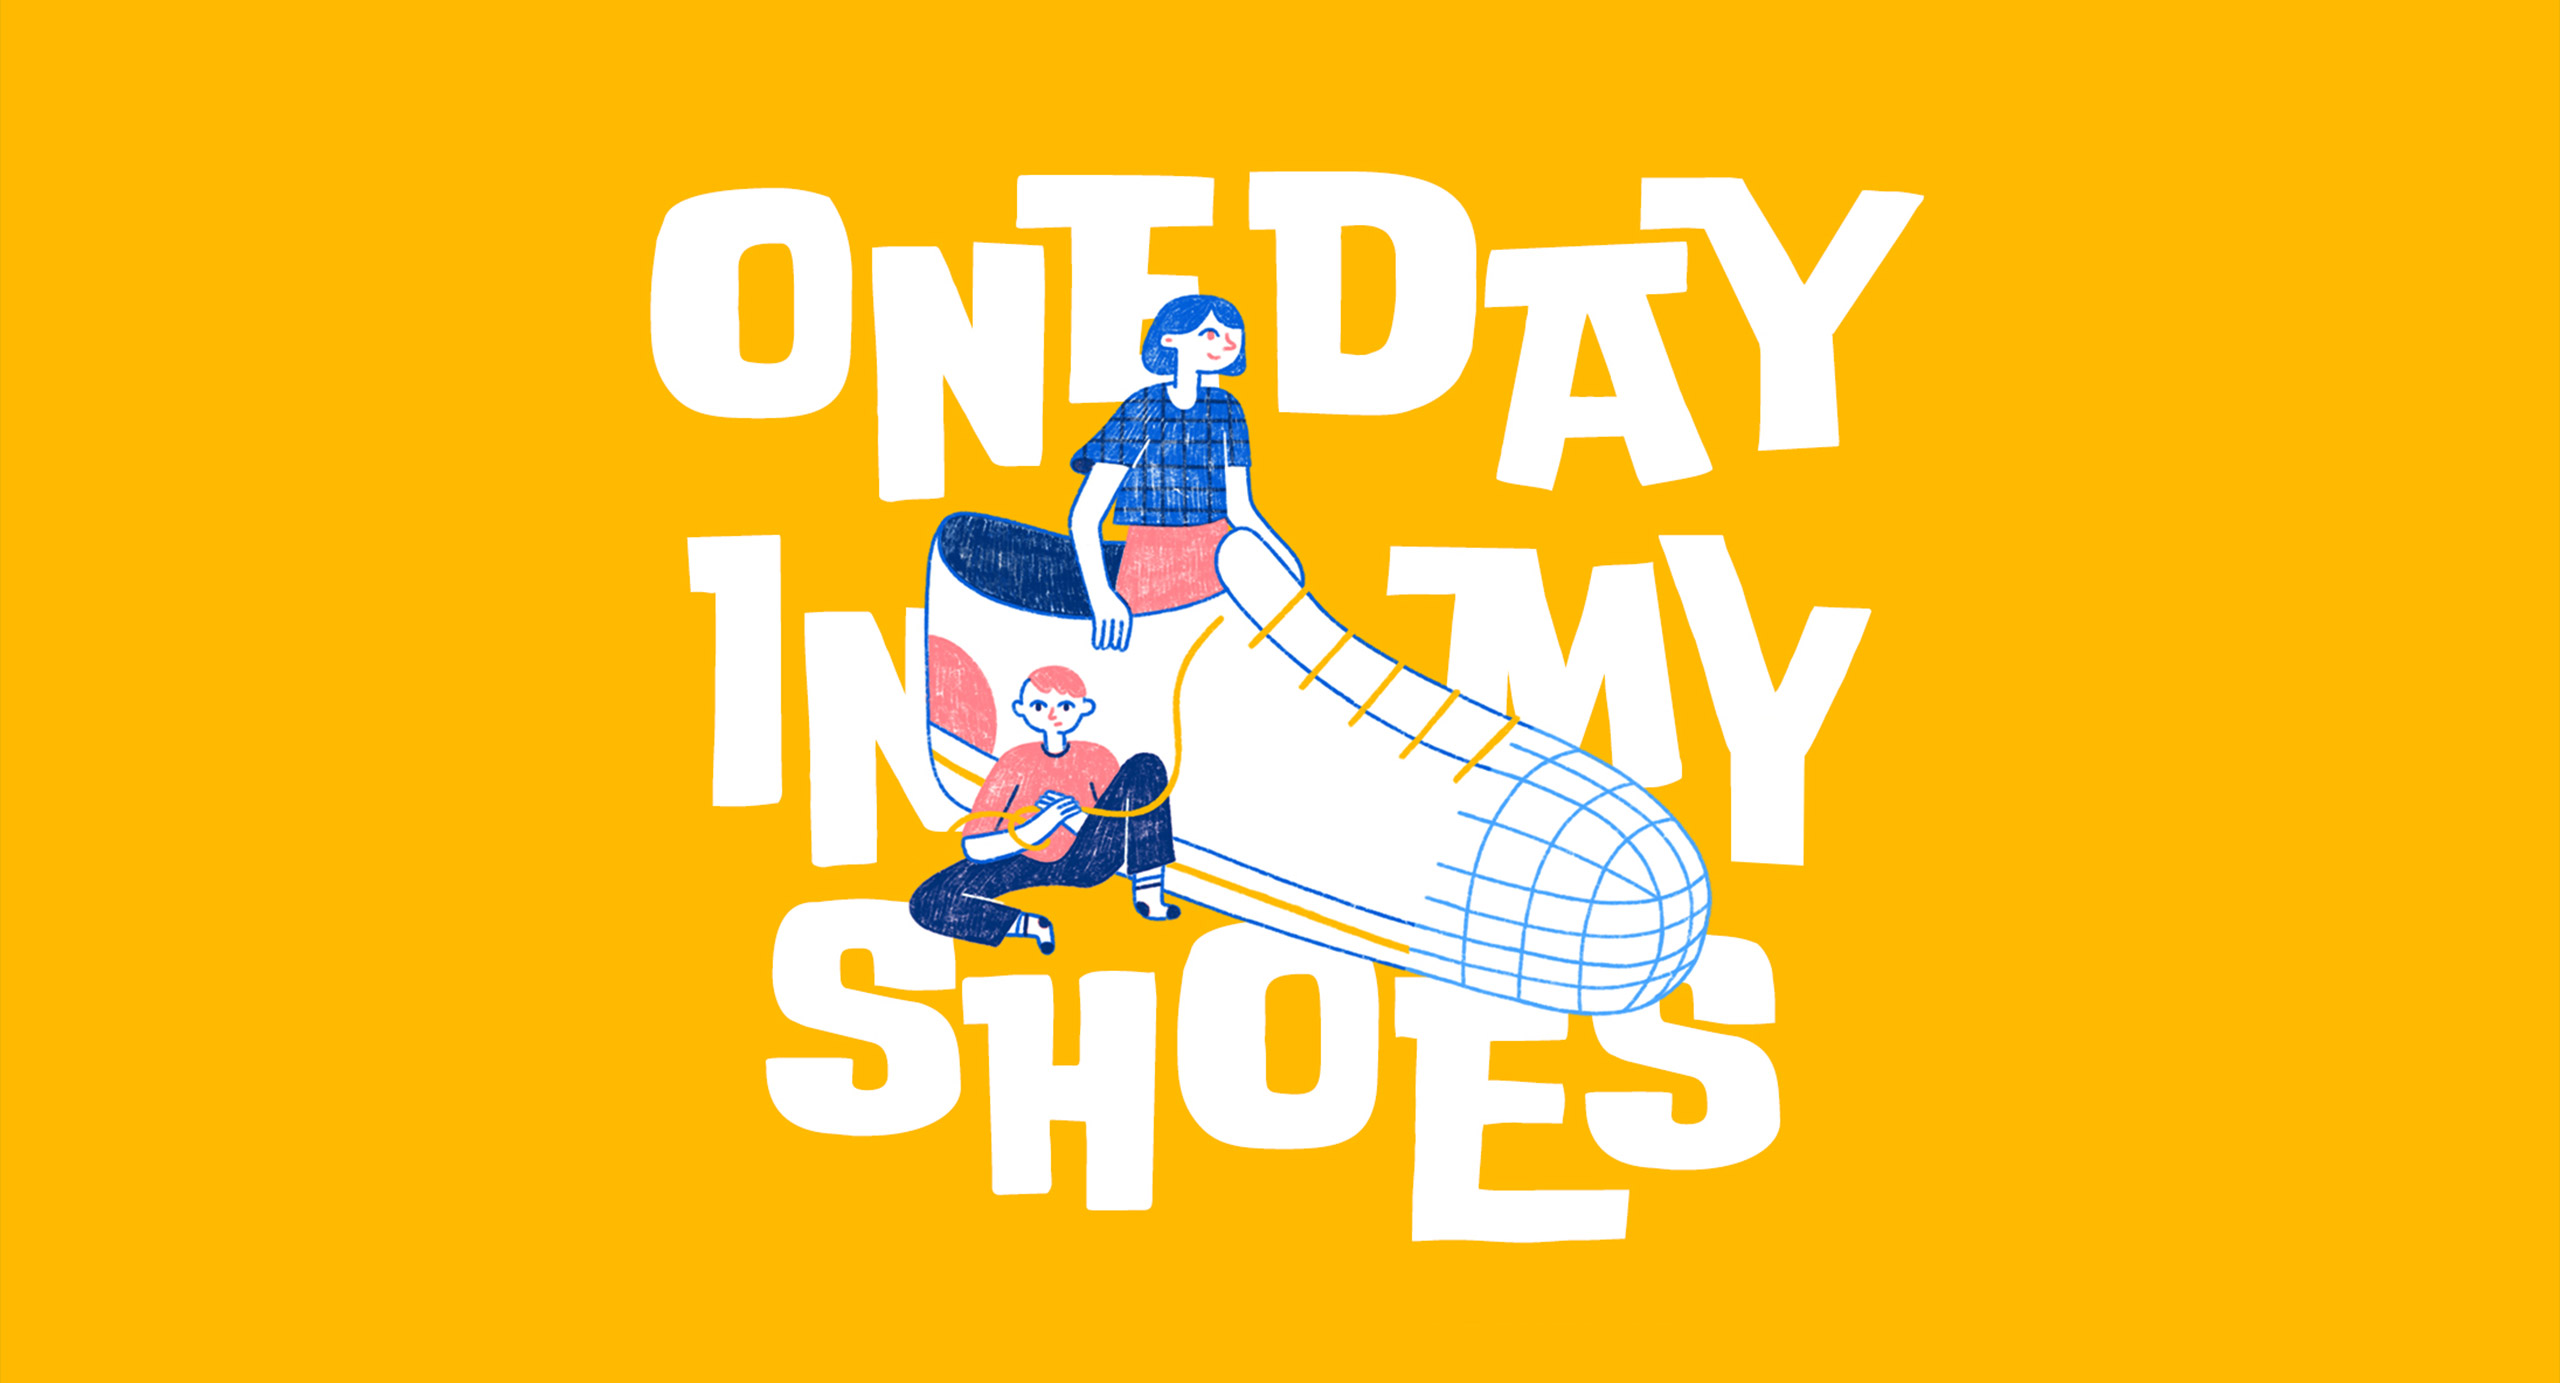 One day in my shoes